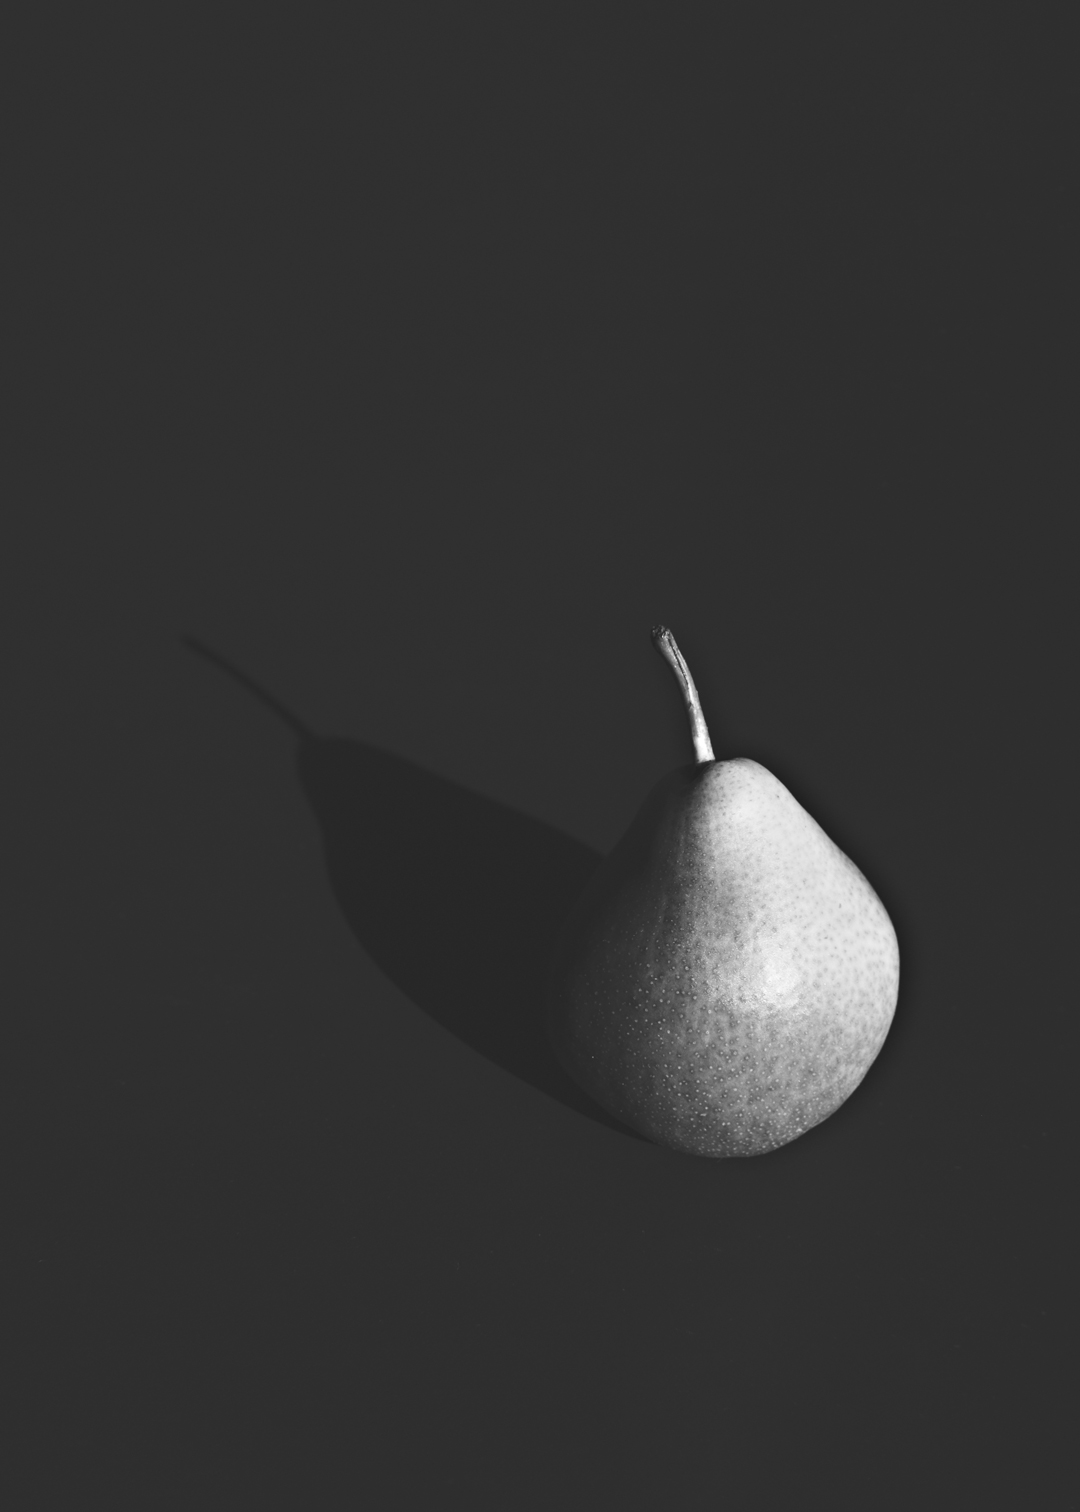 Pear with shadow on dark by michelle p. via besotted